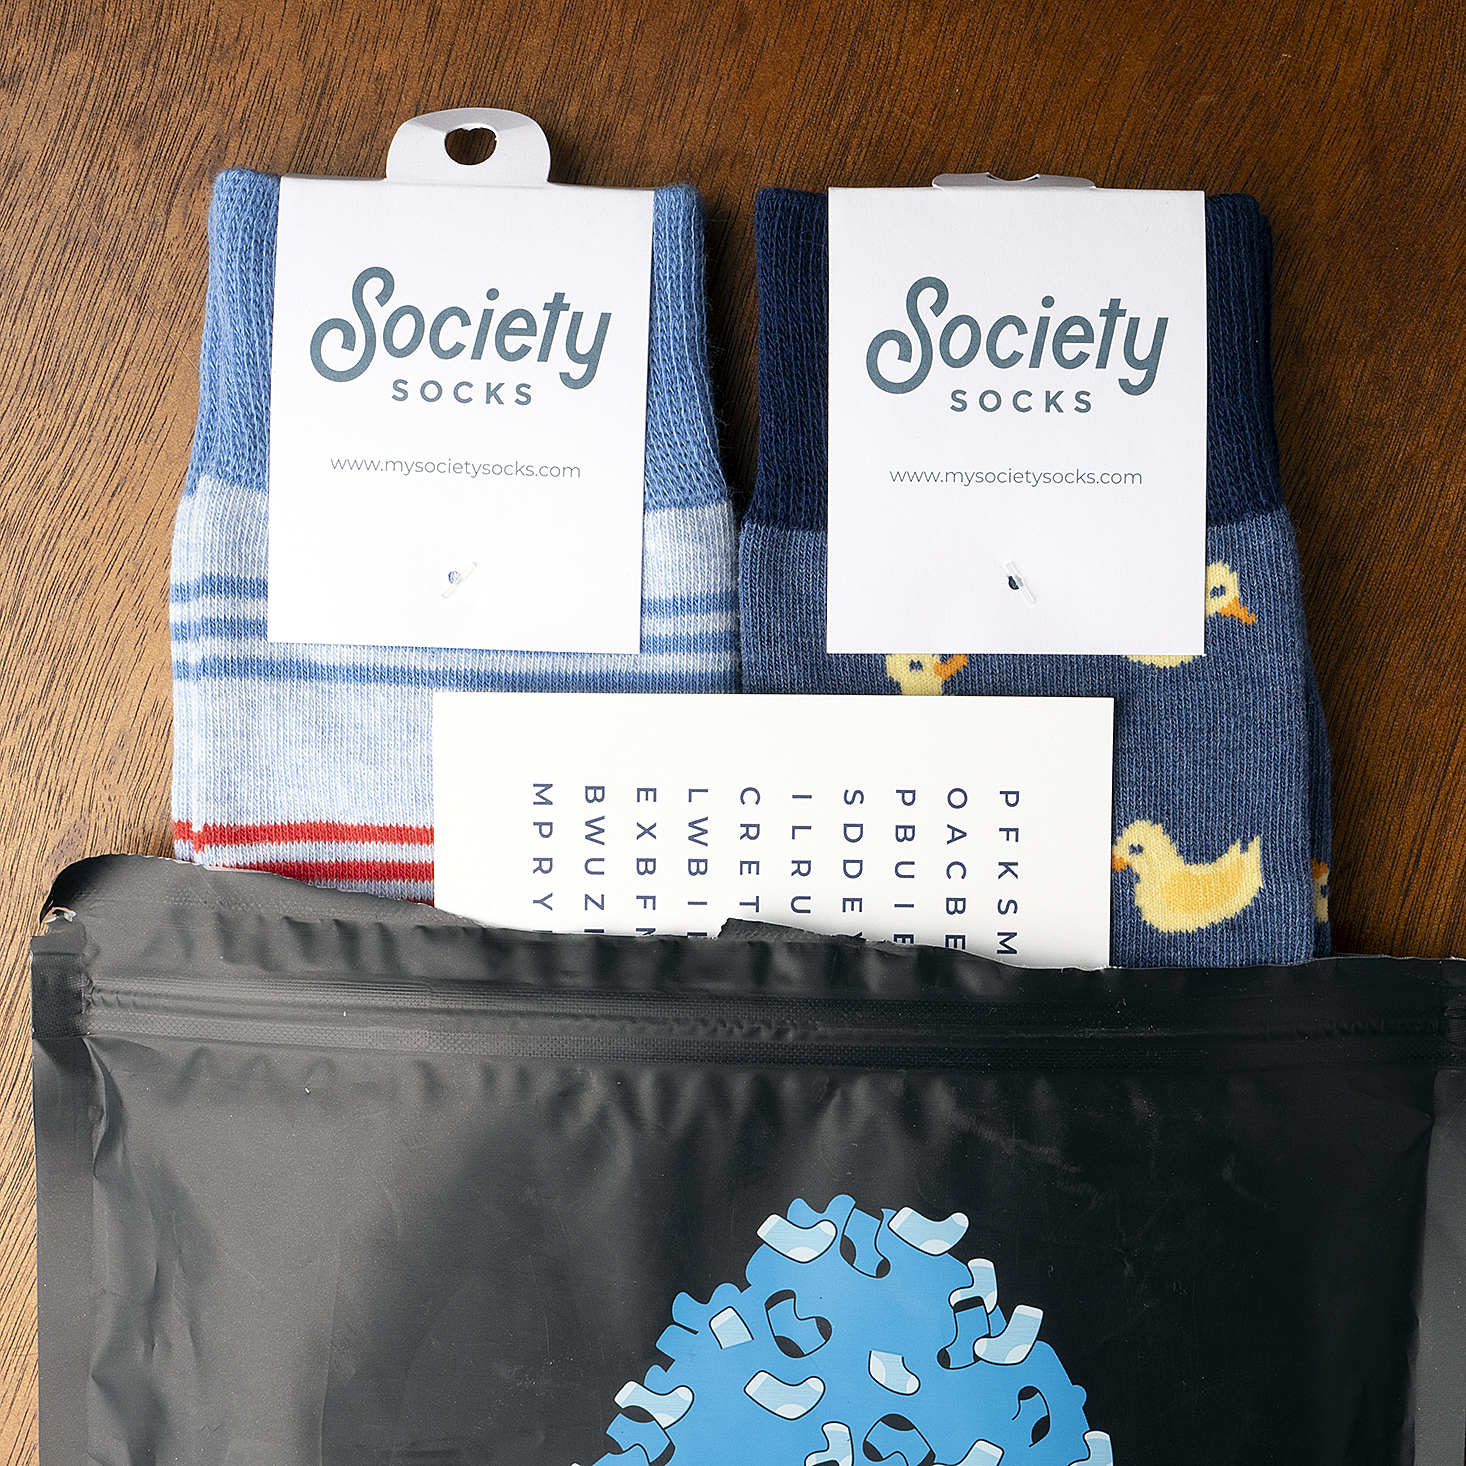 Society Socks Review + 50% Off Coupon – March 2021